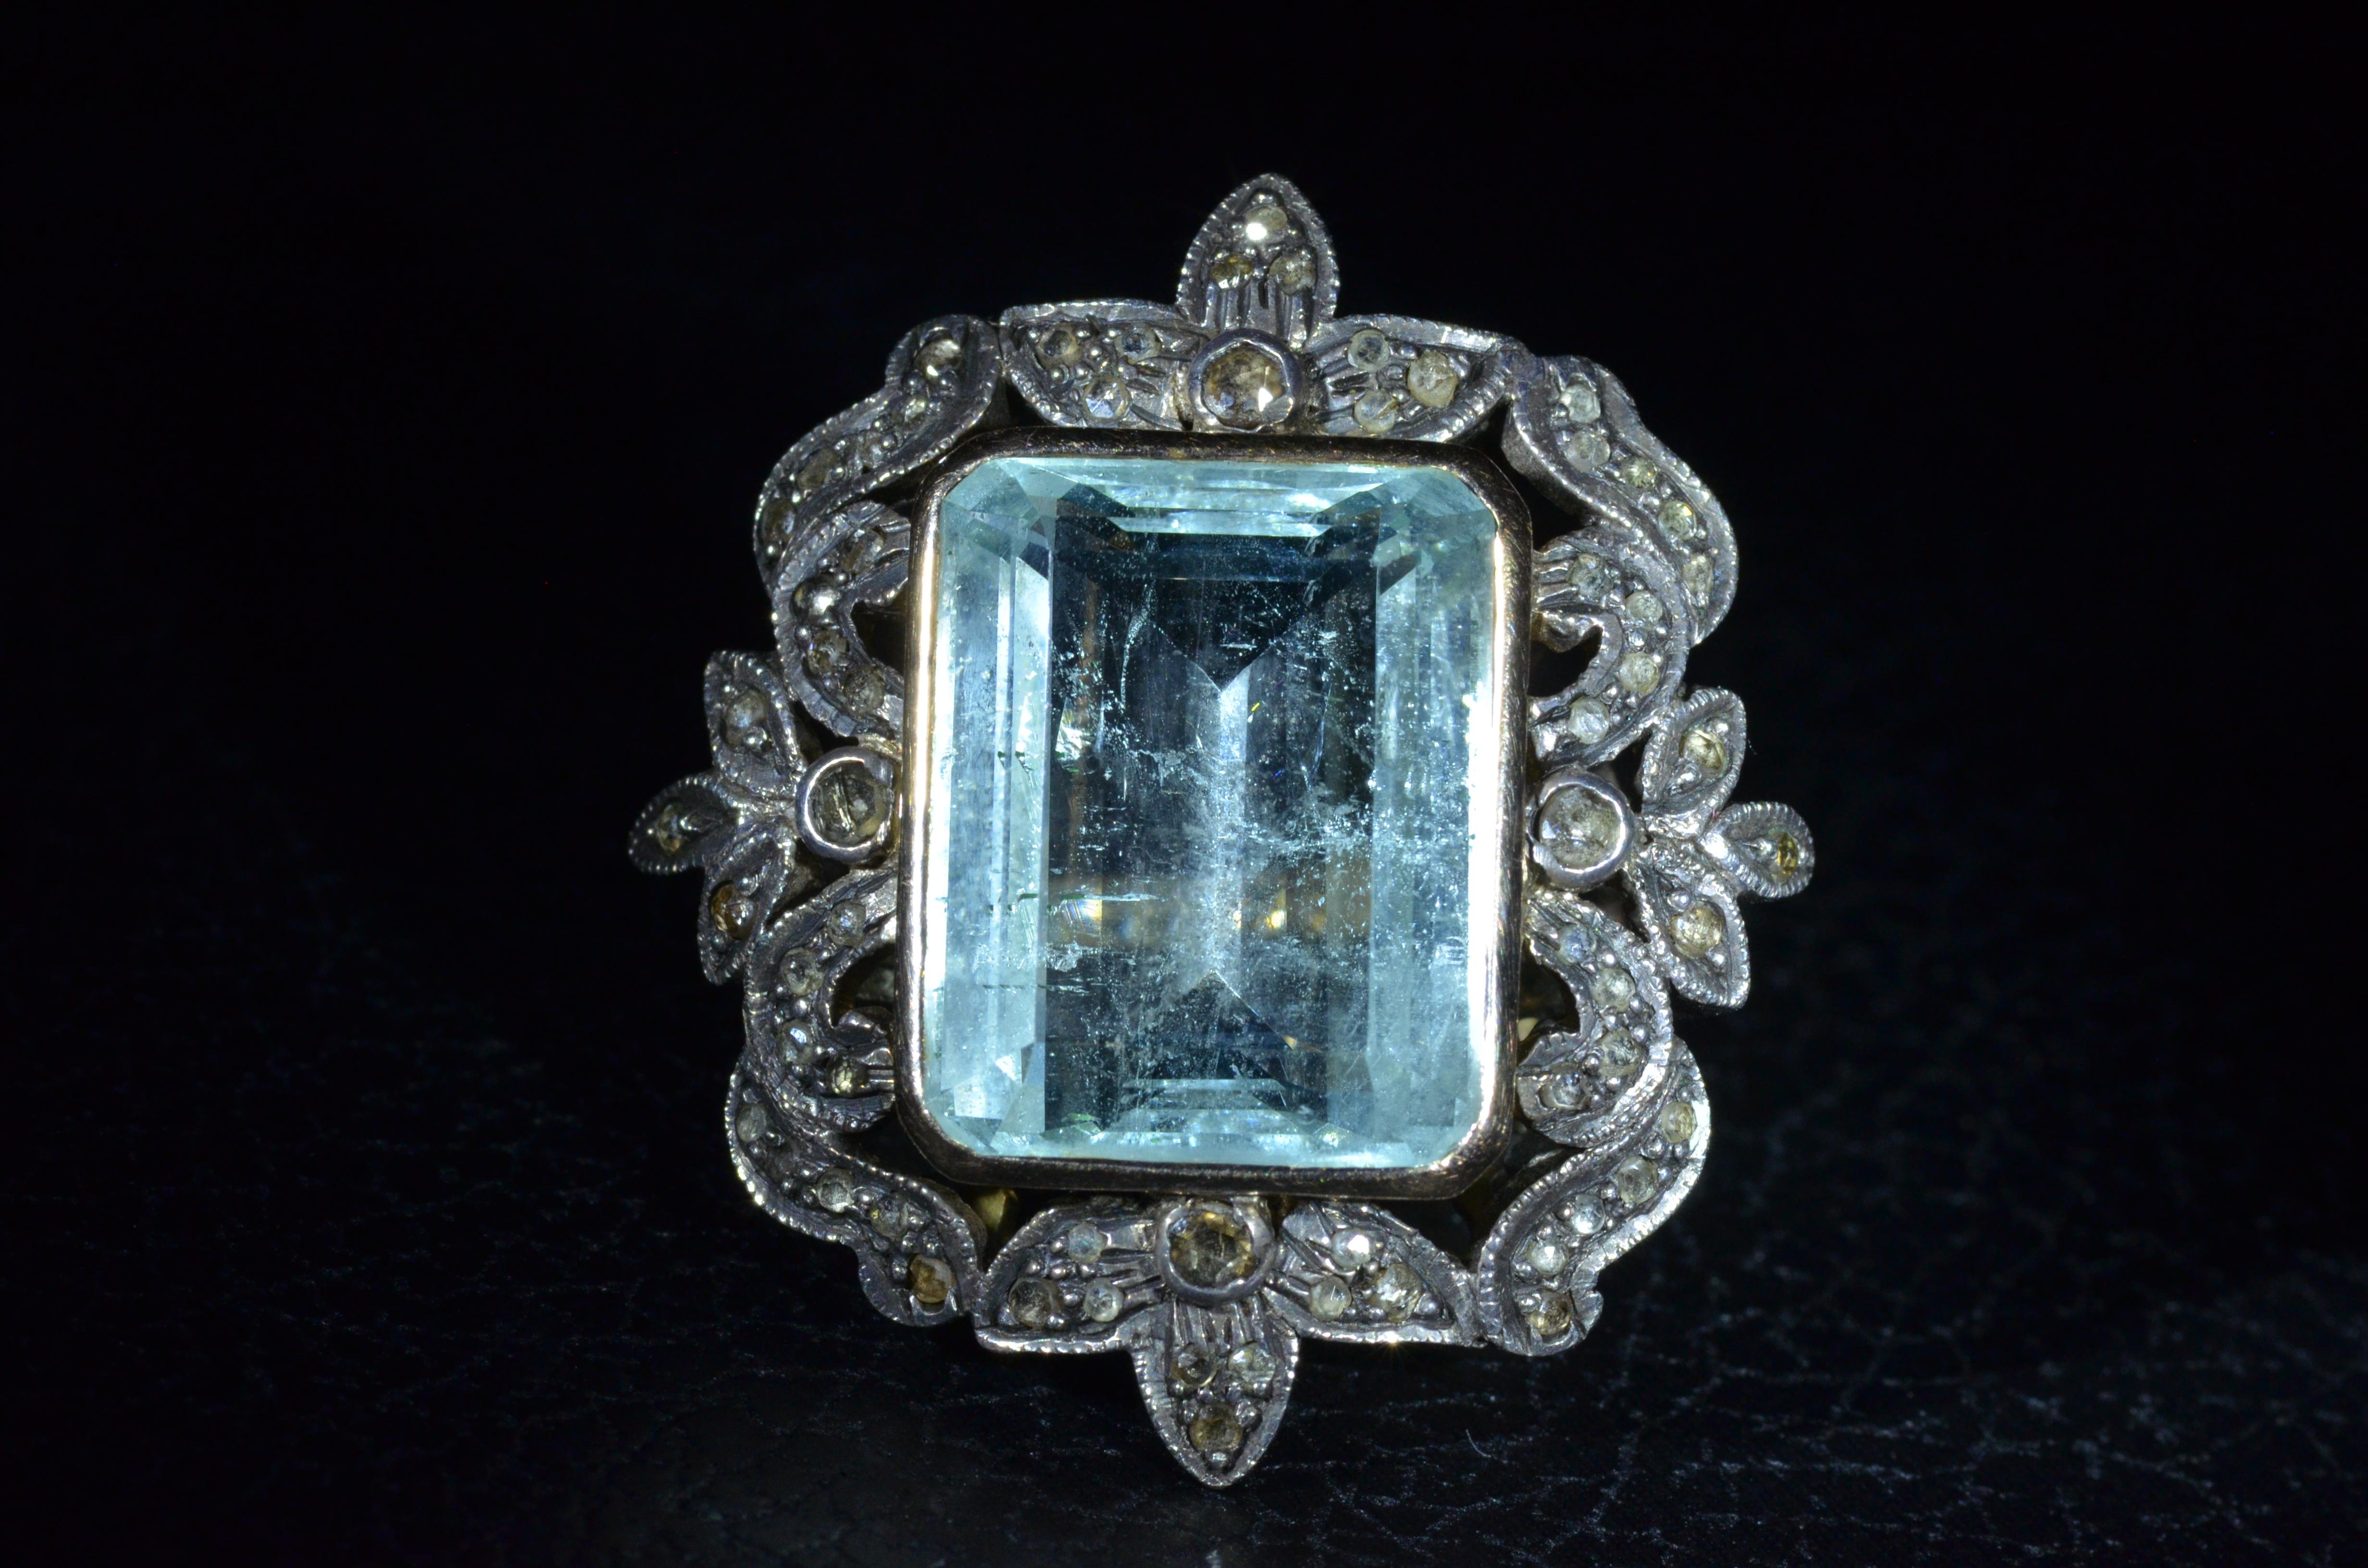 Georgian Ring in 14 karat rose gold with silver top set with 15.50 carat emerald cut natural Aquamarine Beryl.  The aqua is a beautiful light very slightly greenish-Blue with natural hydro-thermal inclusions!  Surrounding the center in a floral like